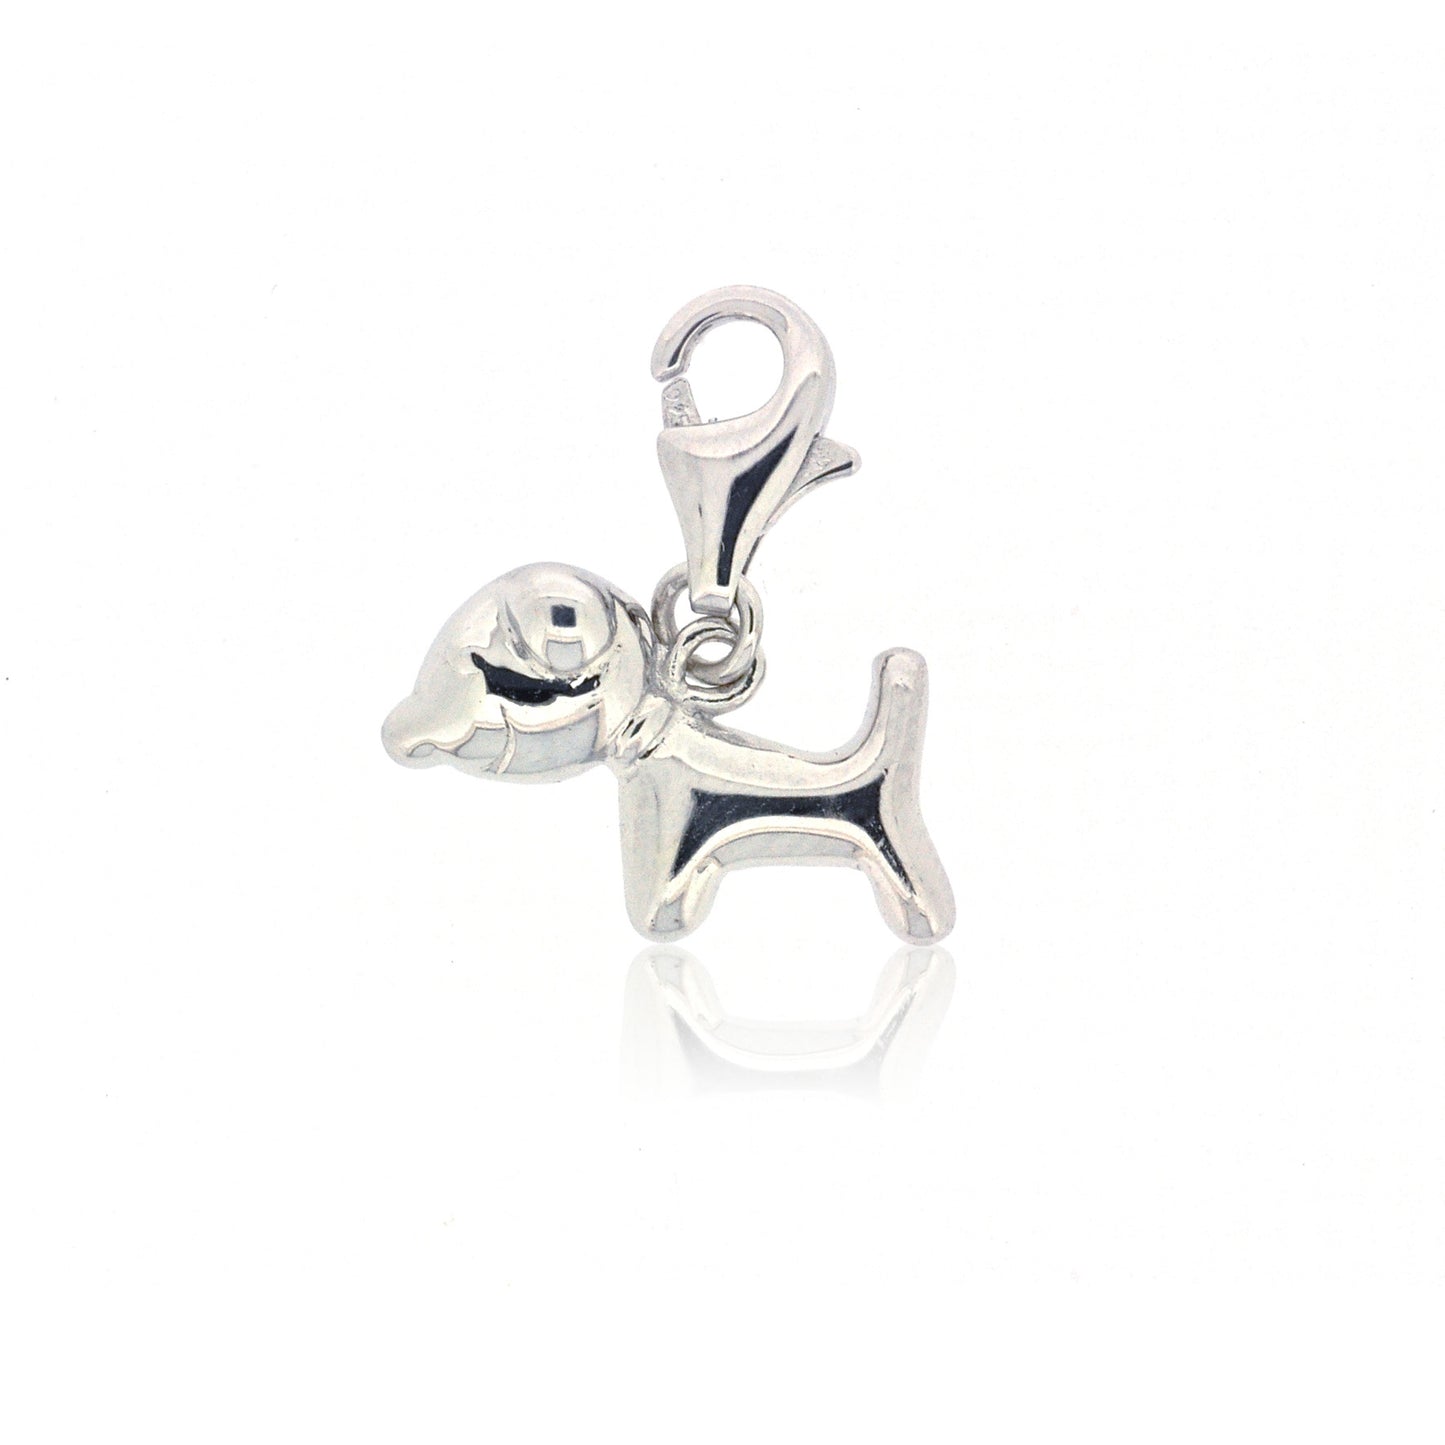 Mimi Too Character Bracelet  Charms - Sterling Silver - puppy 